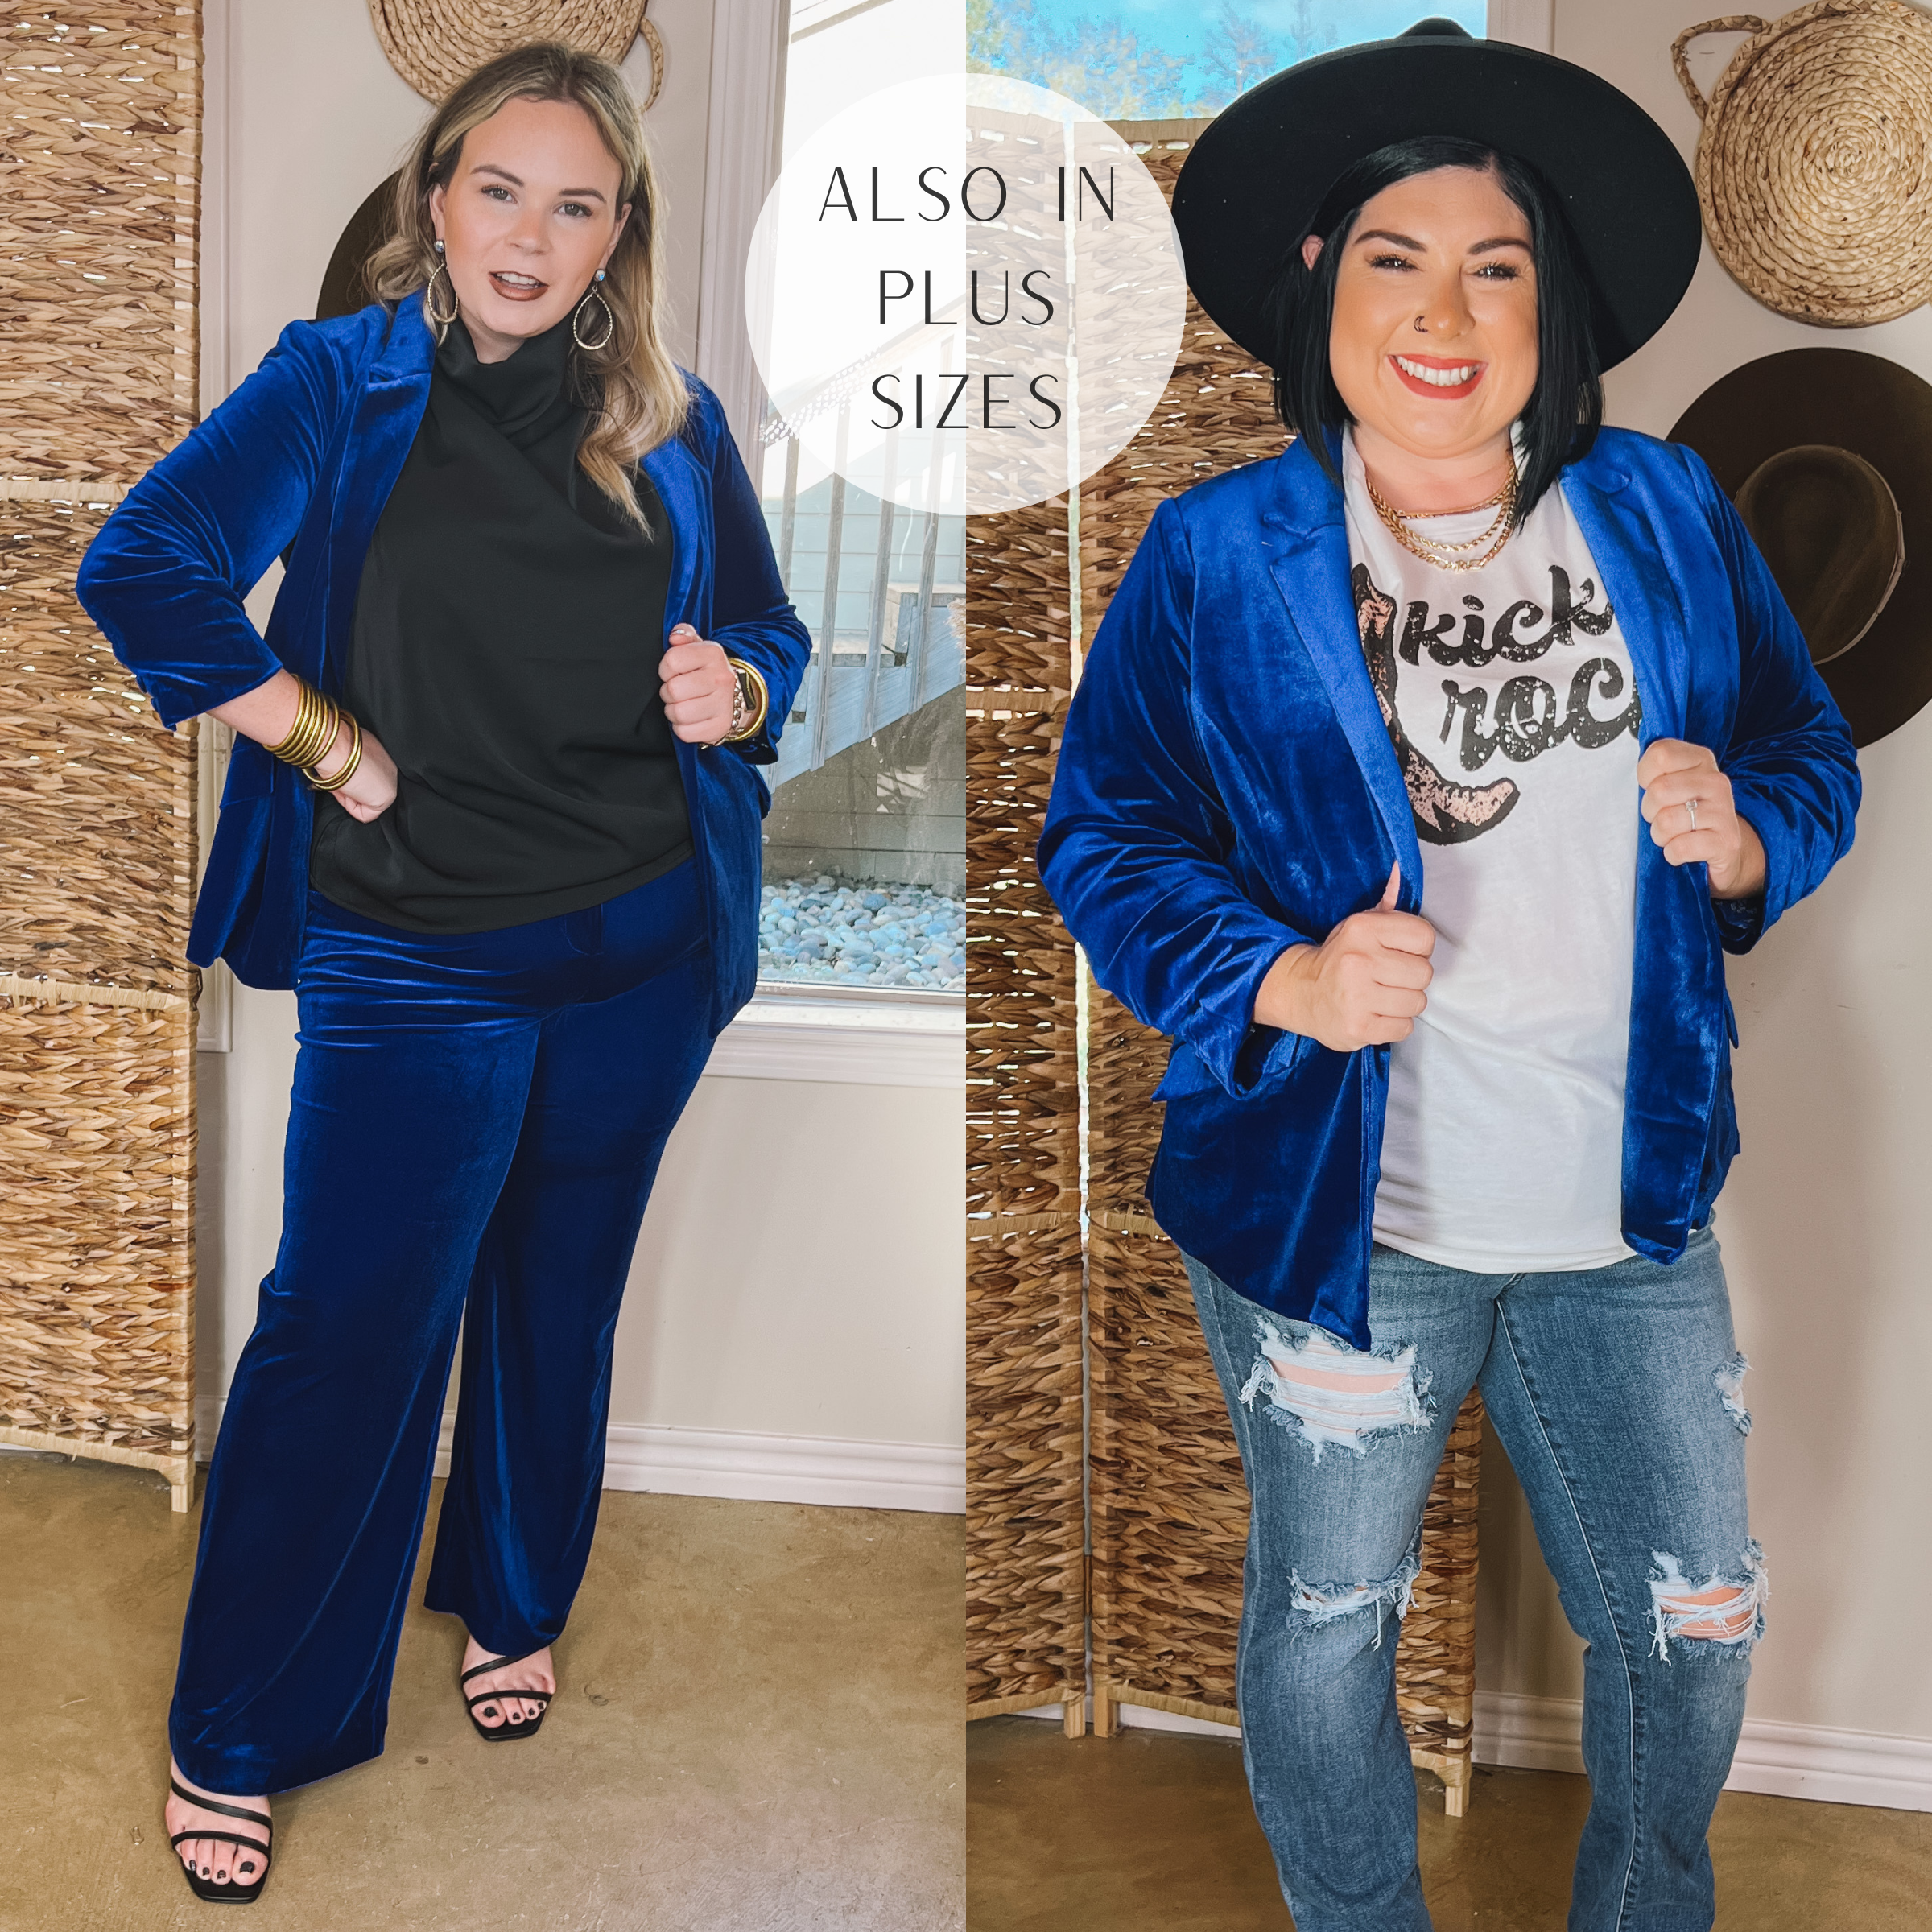 Models are wearing a royal blue velvet blazer. Size large model has it paired with matching pants, a black blouse, and gold jewelry. Plus size model has it paired with a white graphic tee, distressed jeans, and a black hat.